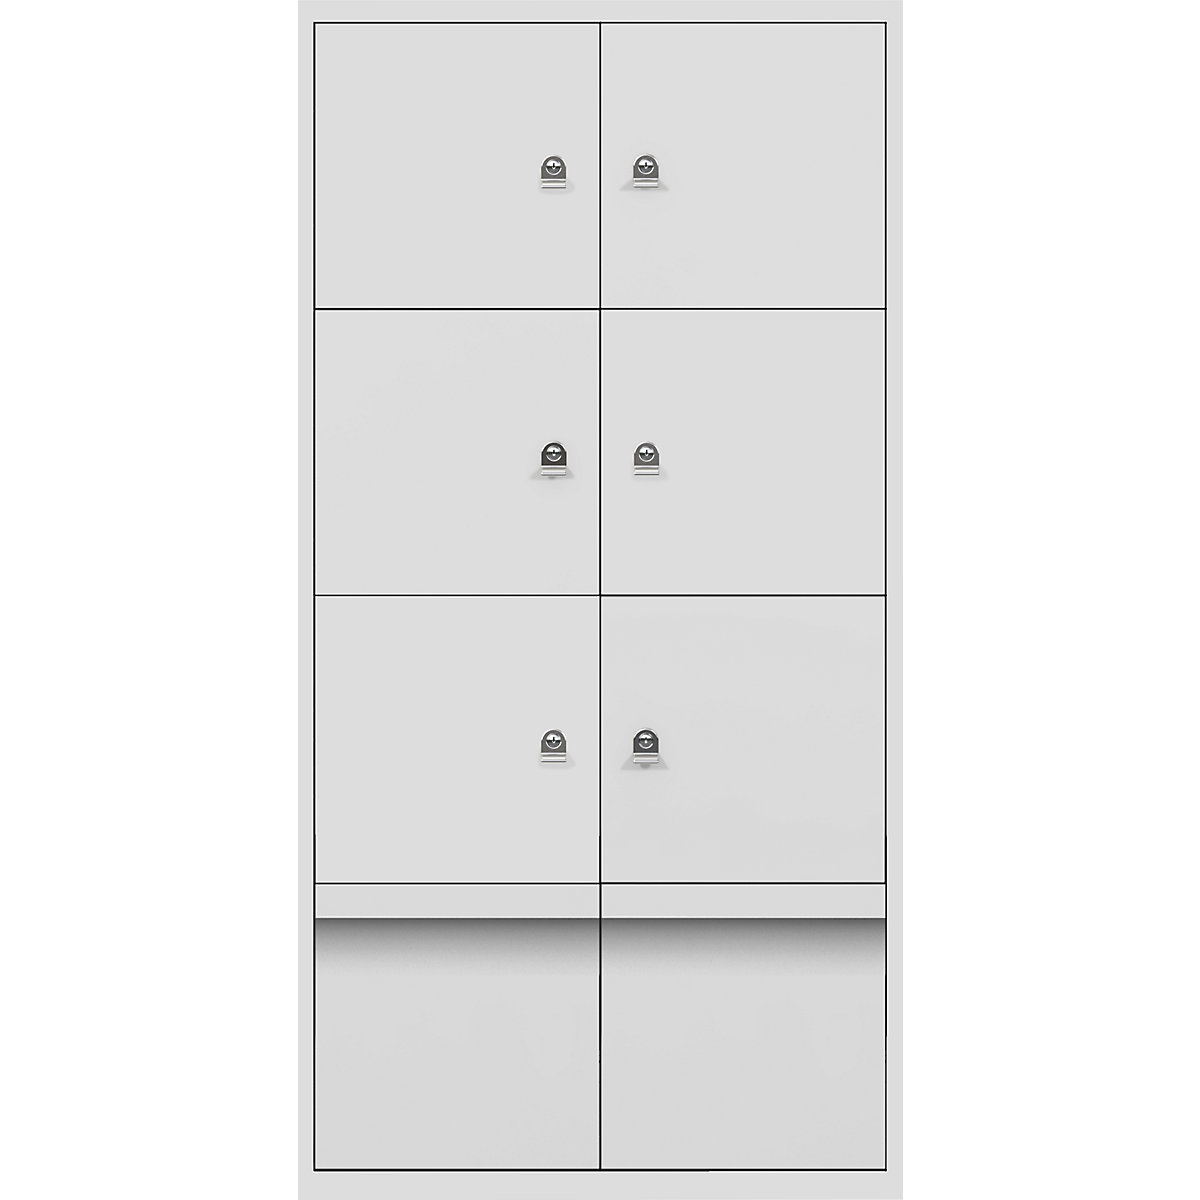 BISLEY – LateralFile™ lodge, with 6 lockable compartments and 2 drawers, height 375 mm each, light grey